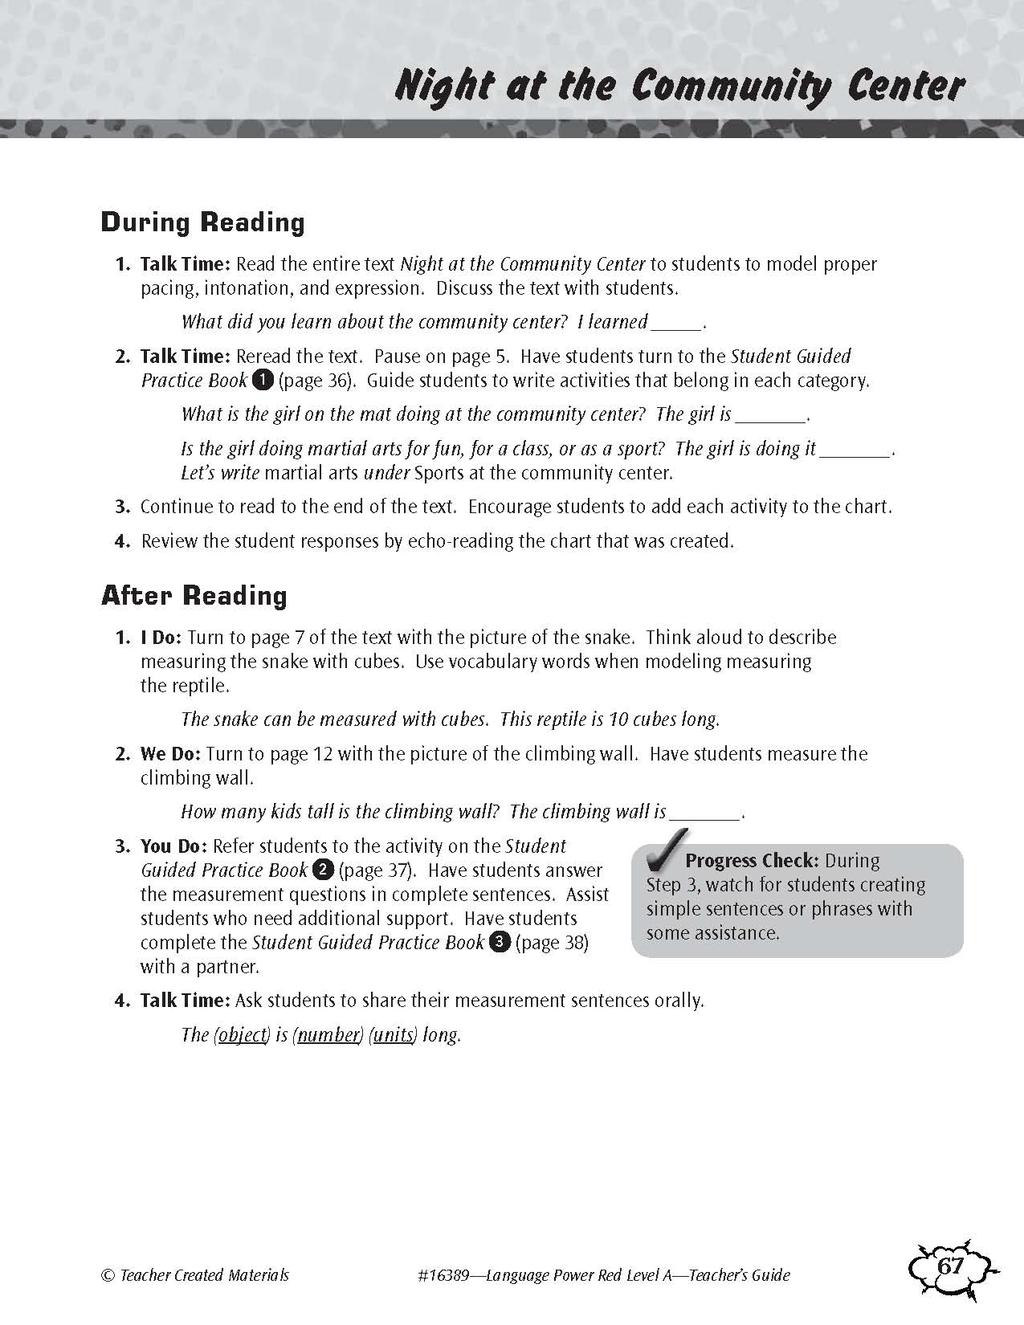 Reading for Information and Argument: A2, Can identify specific information in simpler written material he/she encounters such as letters, brochures, and short newspaper articles on familiar subjects.